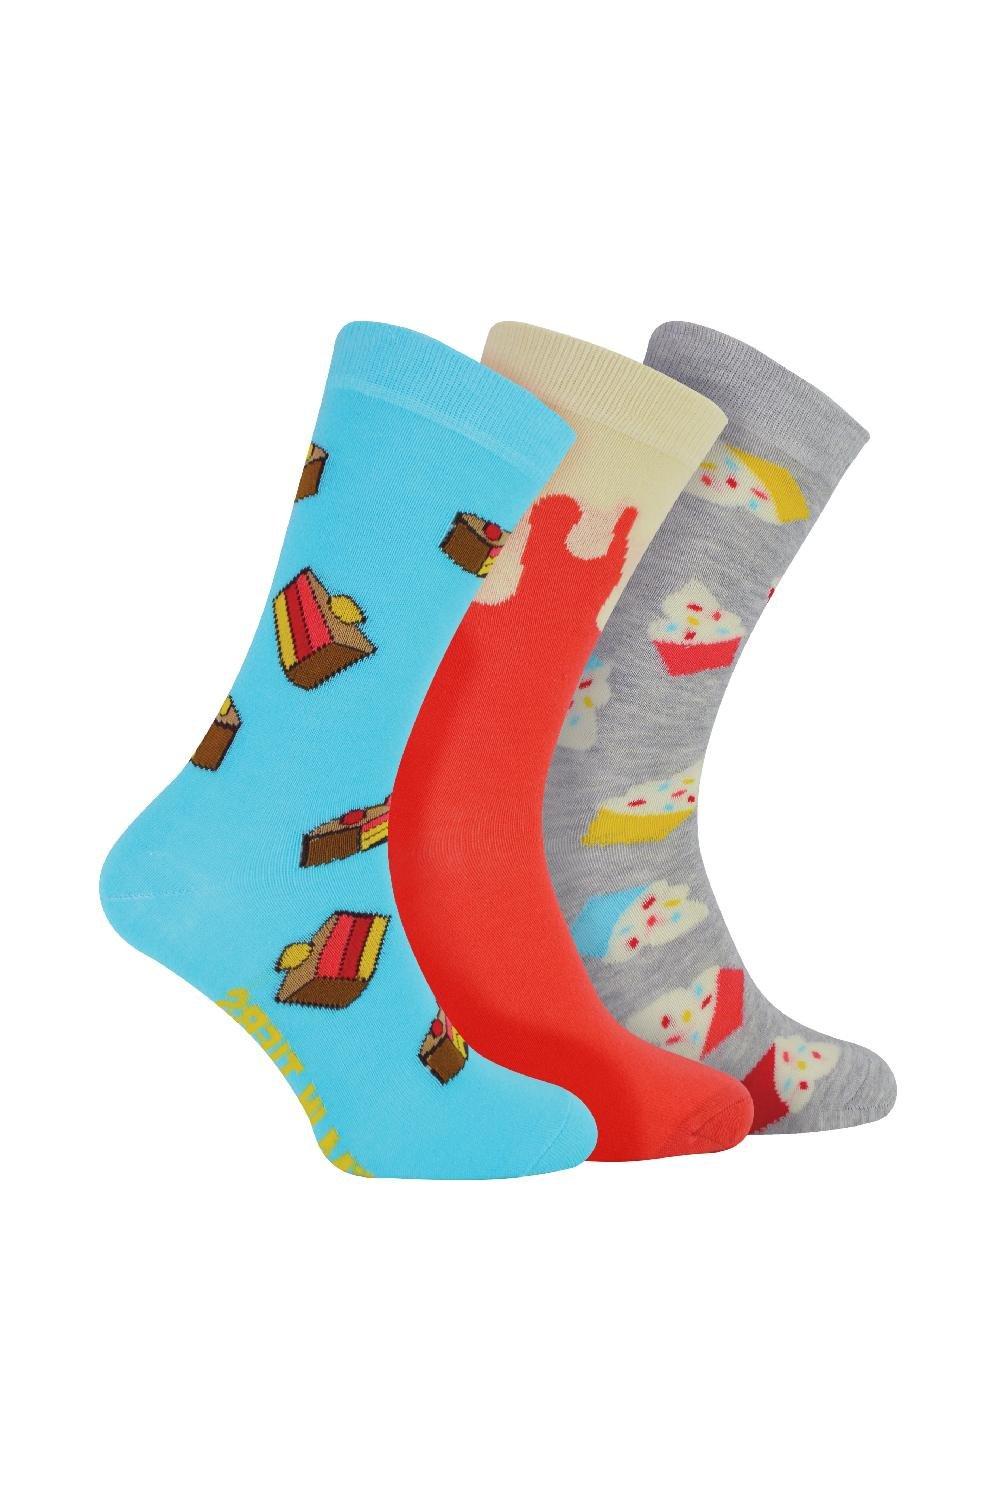 3 Pairs Novelty Soft Cotton Birthday Cake Socks in a Gift Box